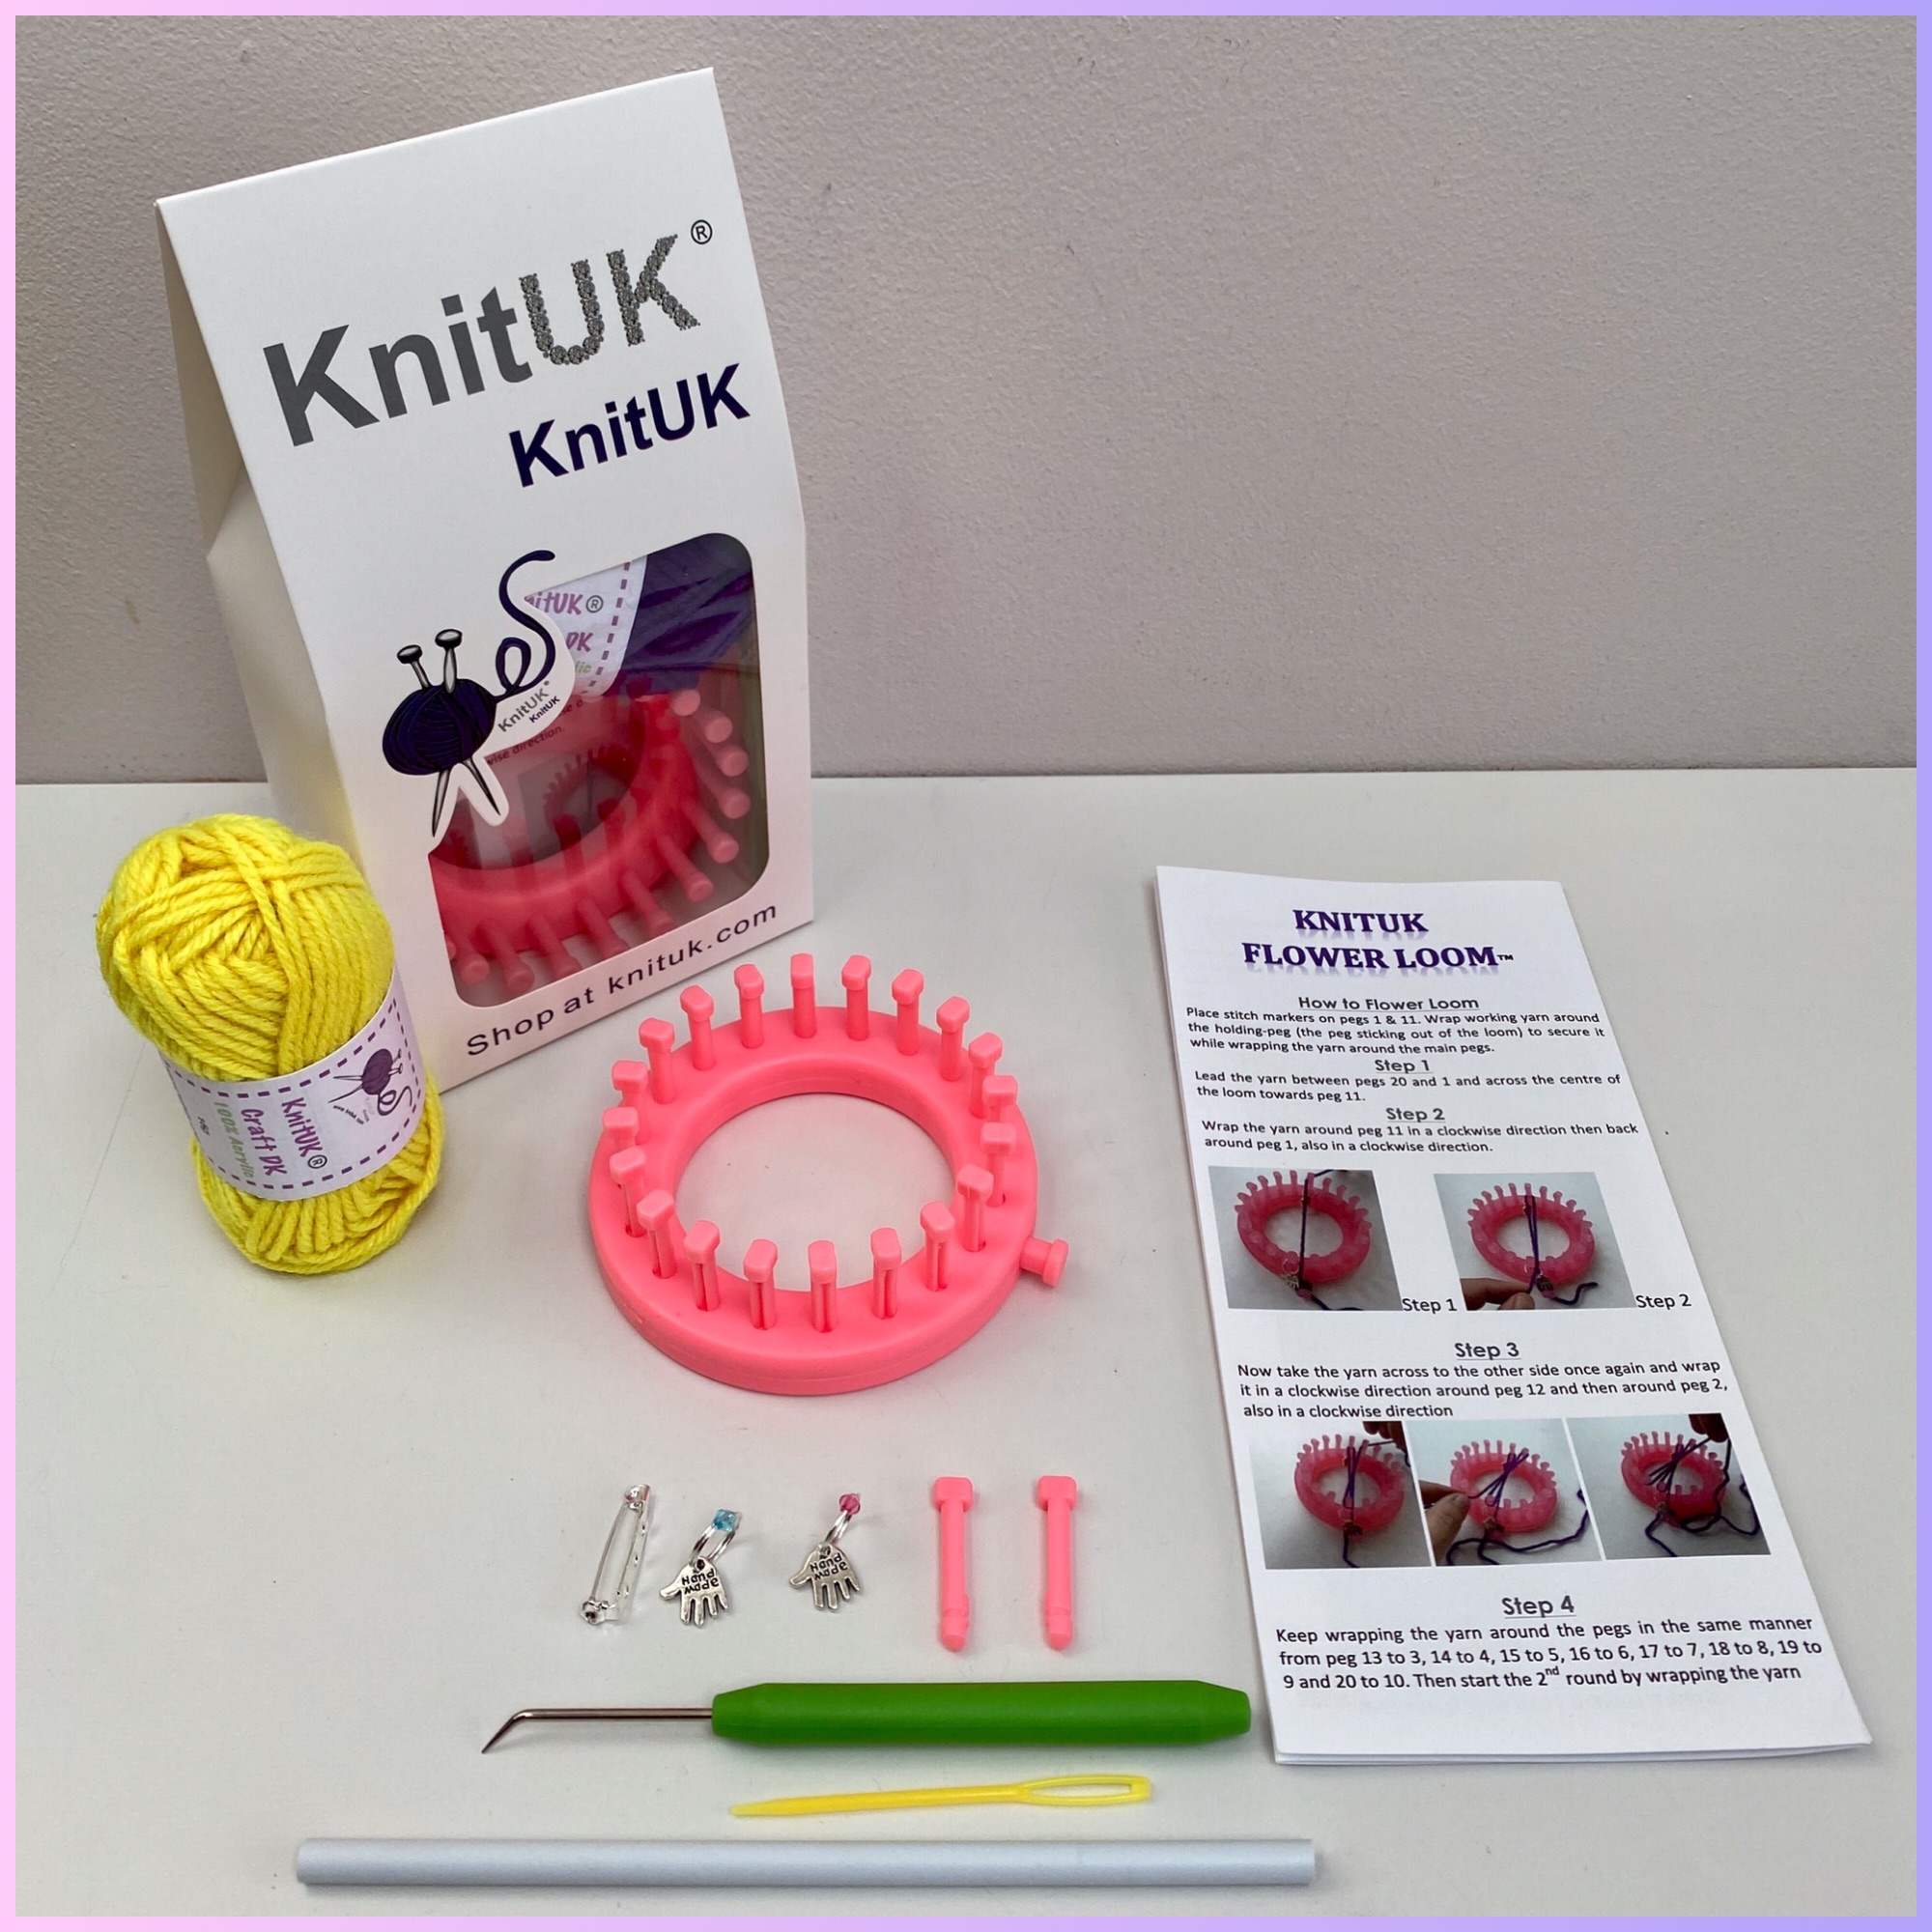 KnitUK 20 pegs flower knitting loom free yarn in box contents how to loom k